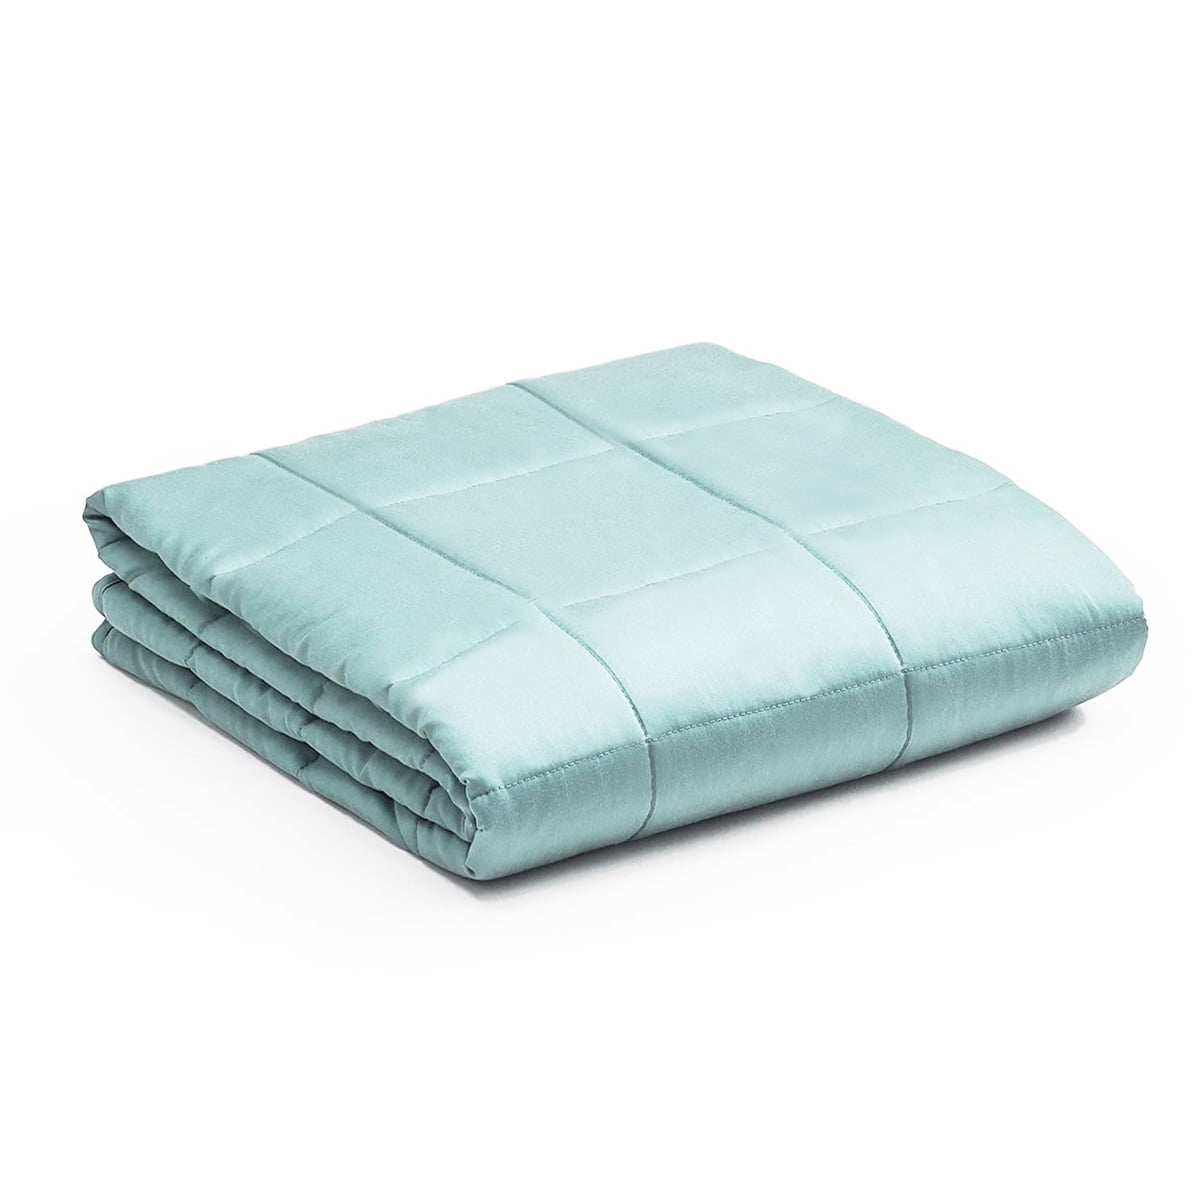 Details about   Soft Fabric Breathable Premium Cooling Heavy Weighted Blanket-15 lbs G Color